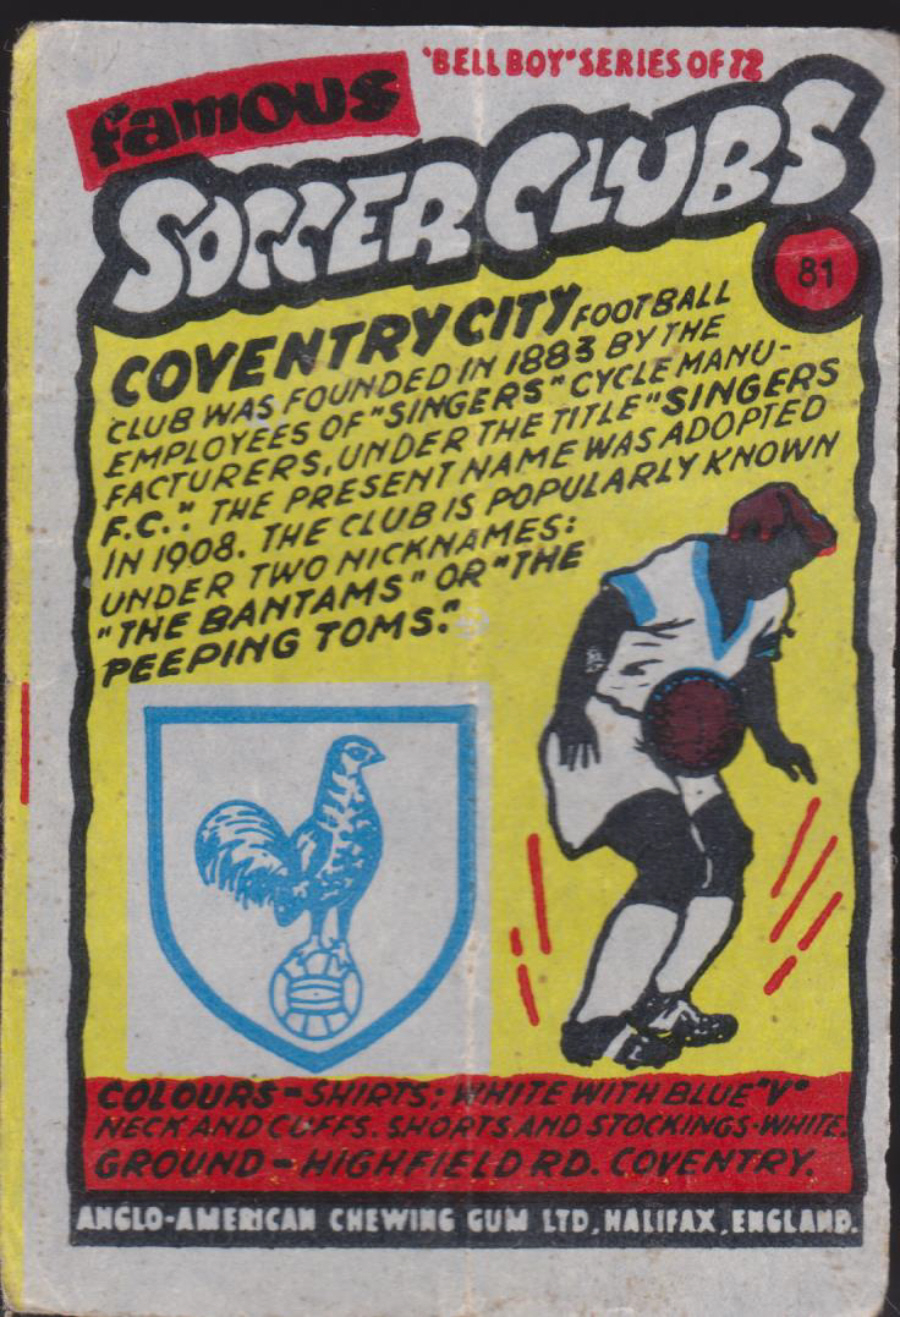 Anglo-American-Chewing-Gum-Wax-Wrapper-Famous-Soccer-Clubs-No-81 - Coventry City